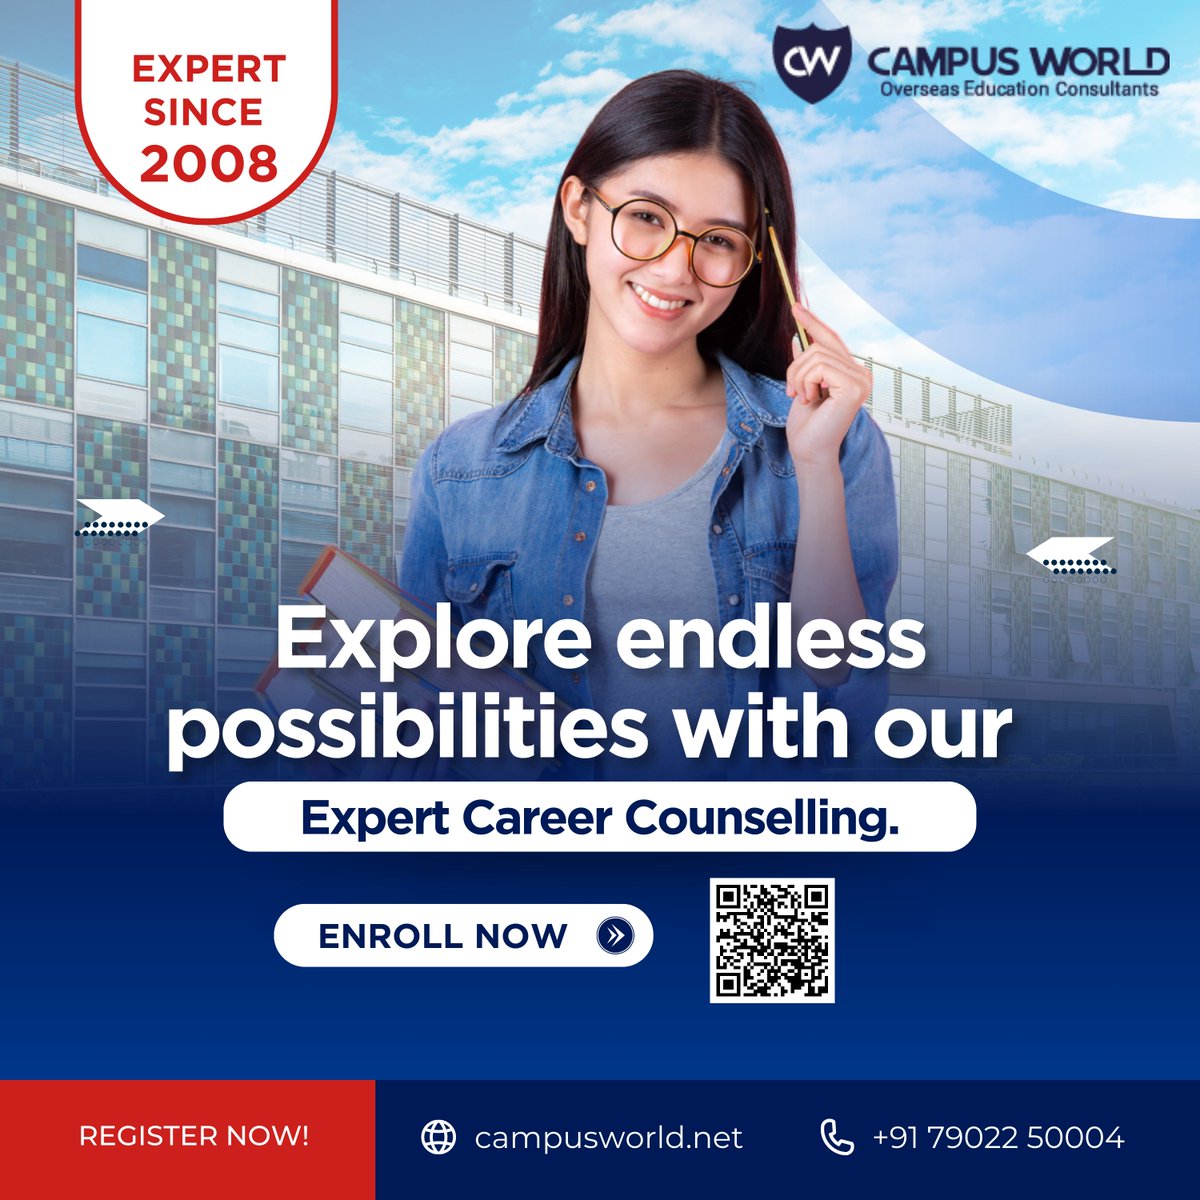 Embark on a journey of limitless potential with our expert career counseling services, brought to you by Campus World. 

Inquire for more at - campusworld.net
Book Appointment - 79022 50004
.
.
#careercounseling #campusworld